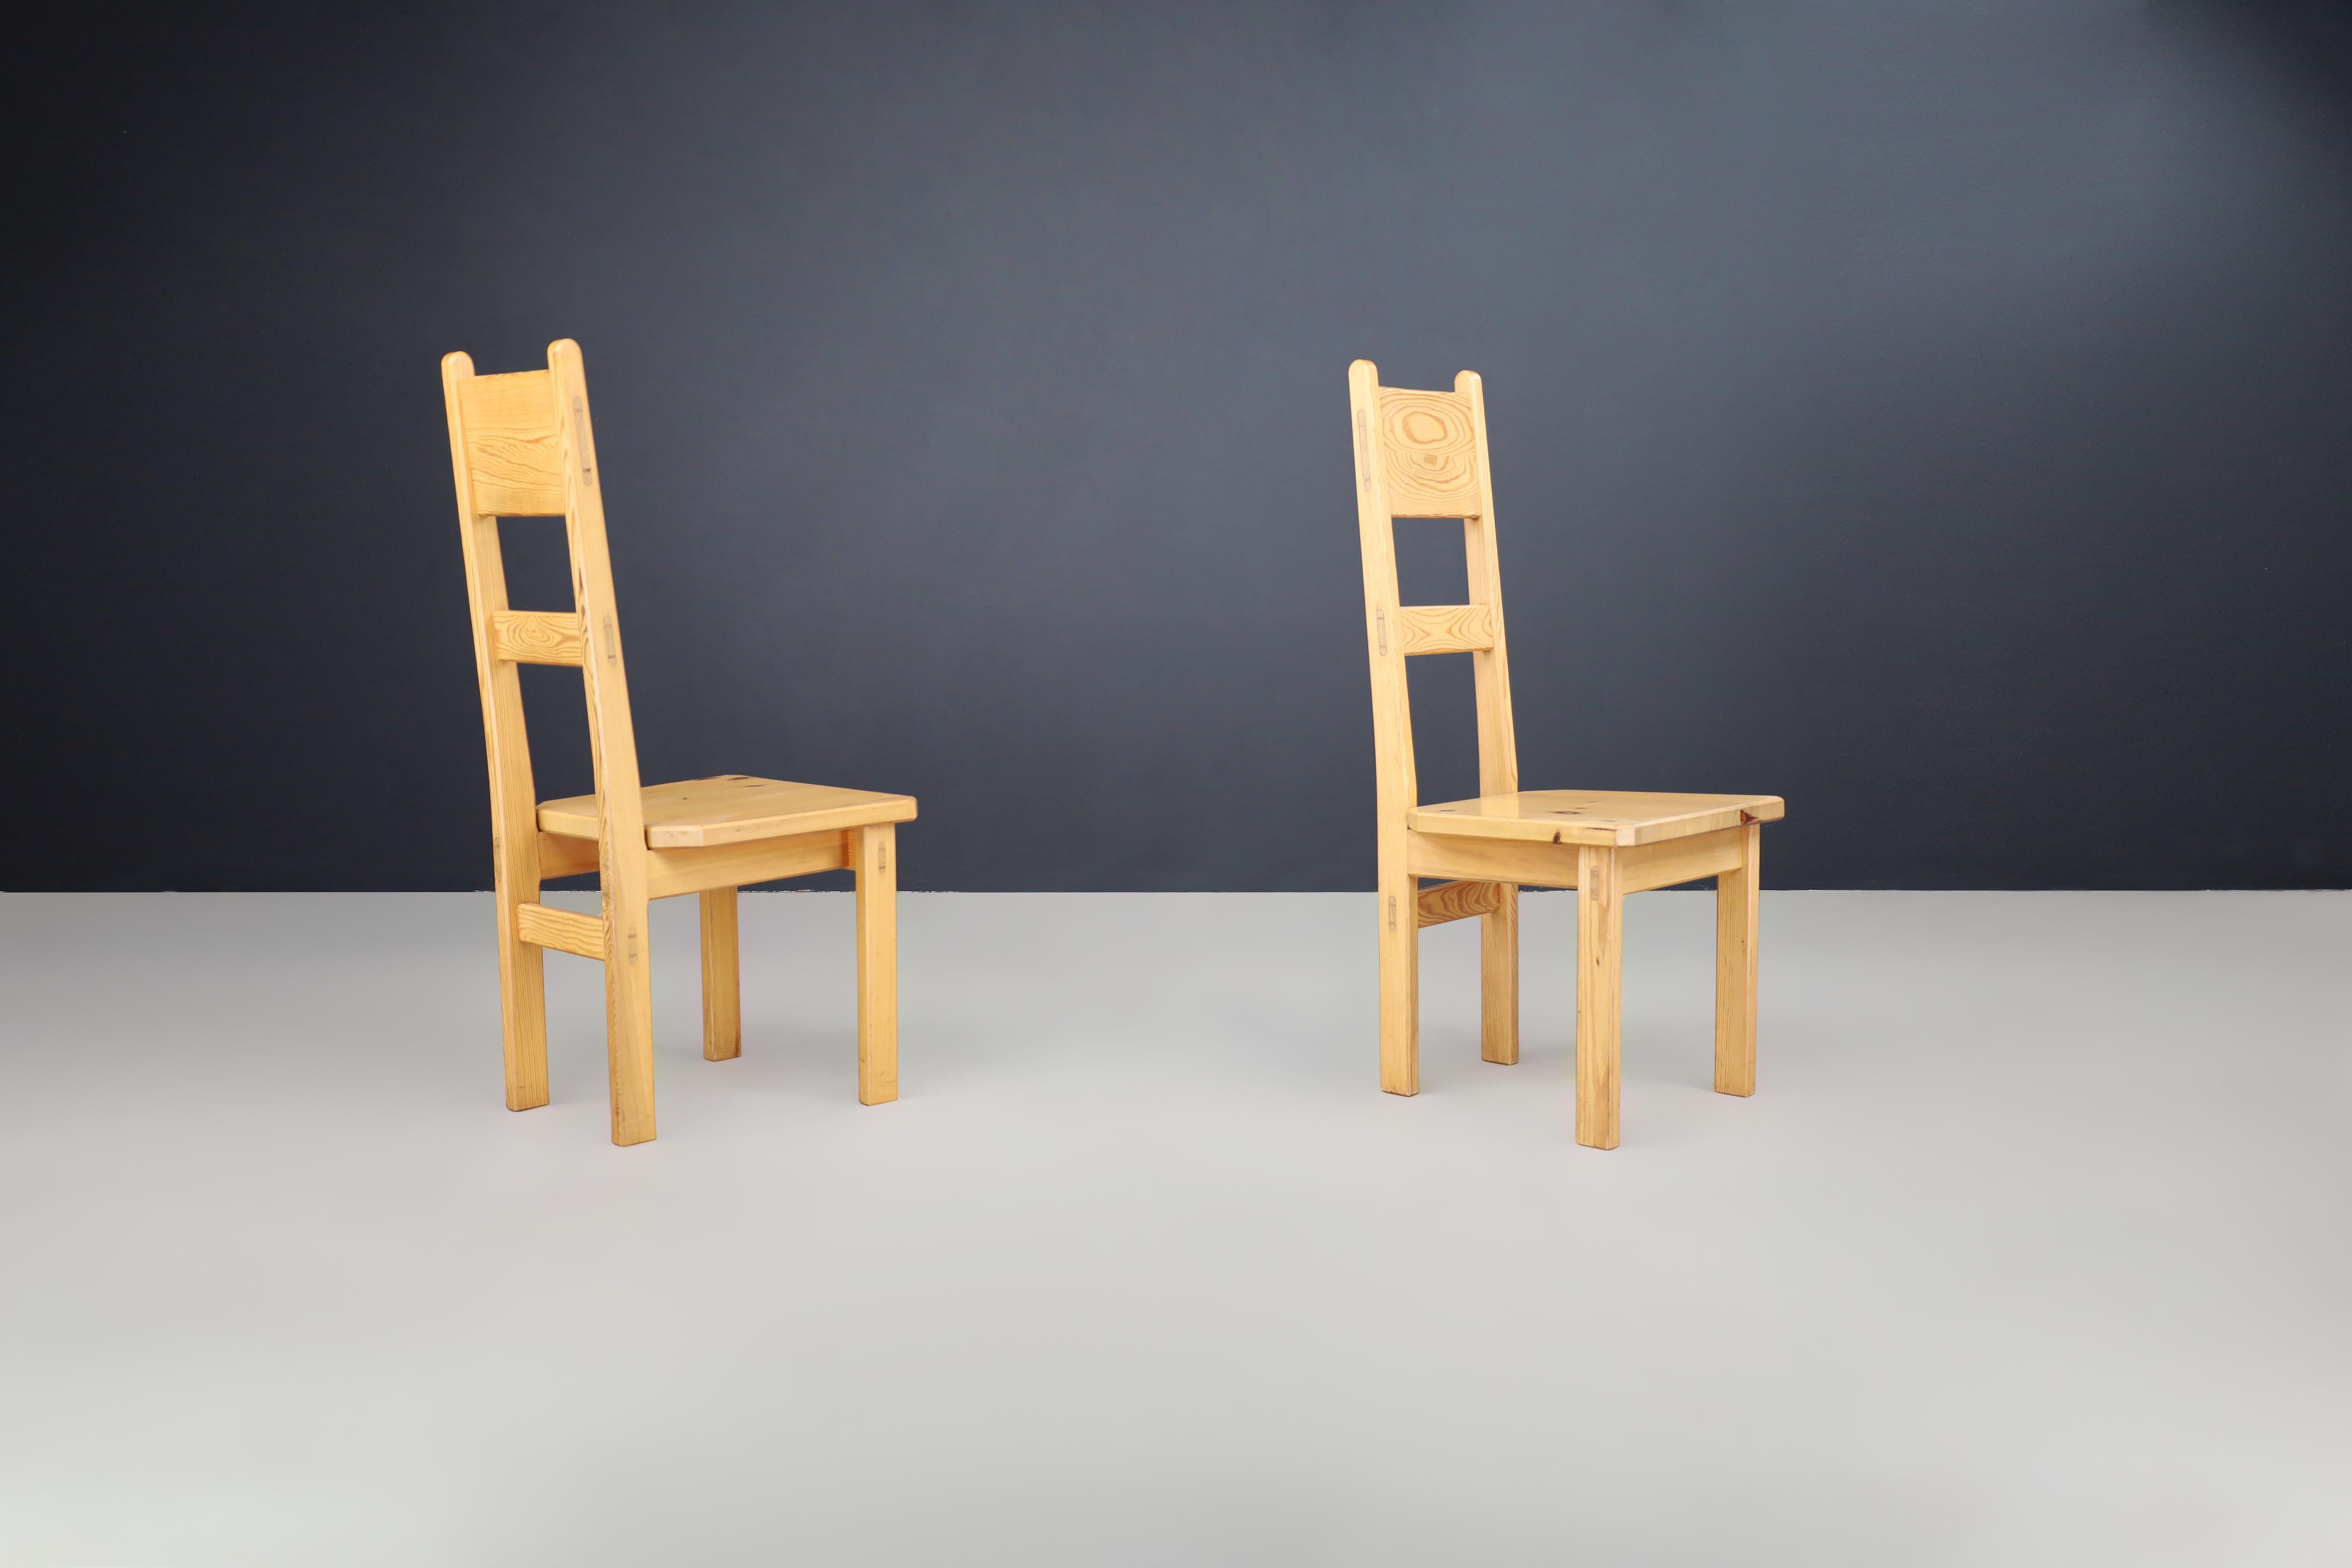 Set of two Roland Wilhelmsson for Karl Andersson & Söner Solid Pine Wood Chairs Sweden 1970s

These are a set of two solid pine chairs designed in the 1960s by Roland Wilhelmsson and manufactured by Karl Andersson & Söner. The chairs have square and